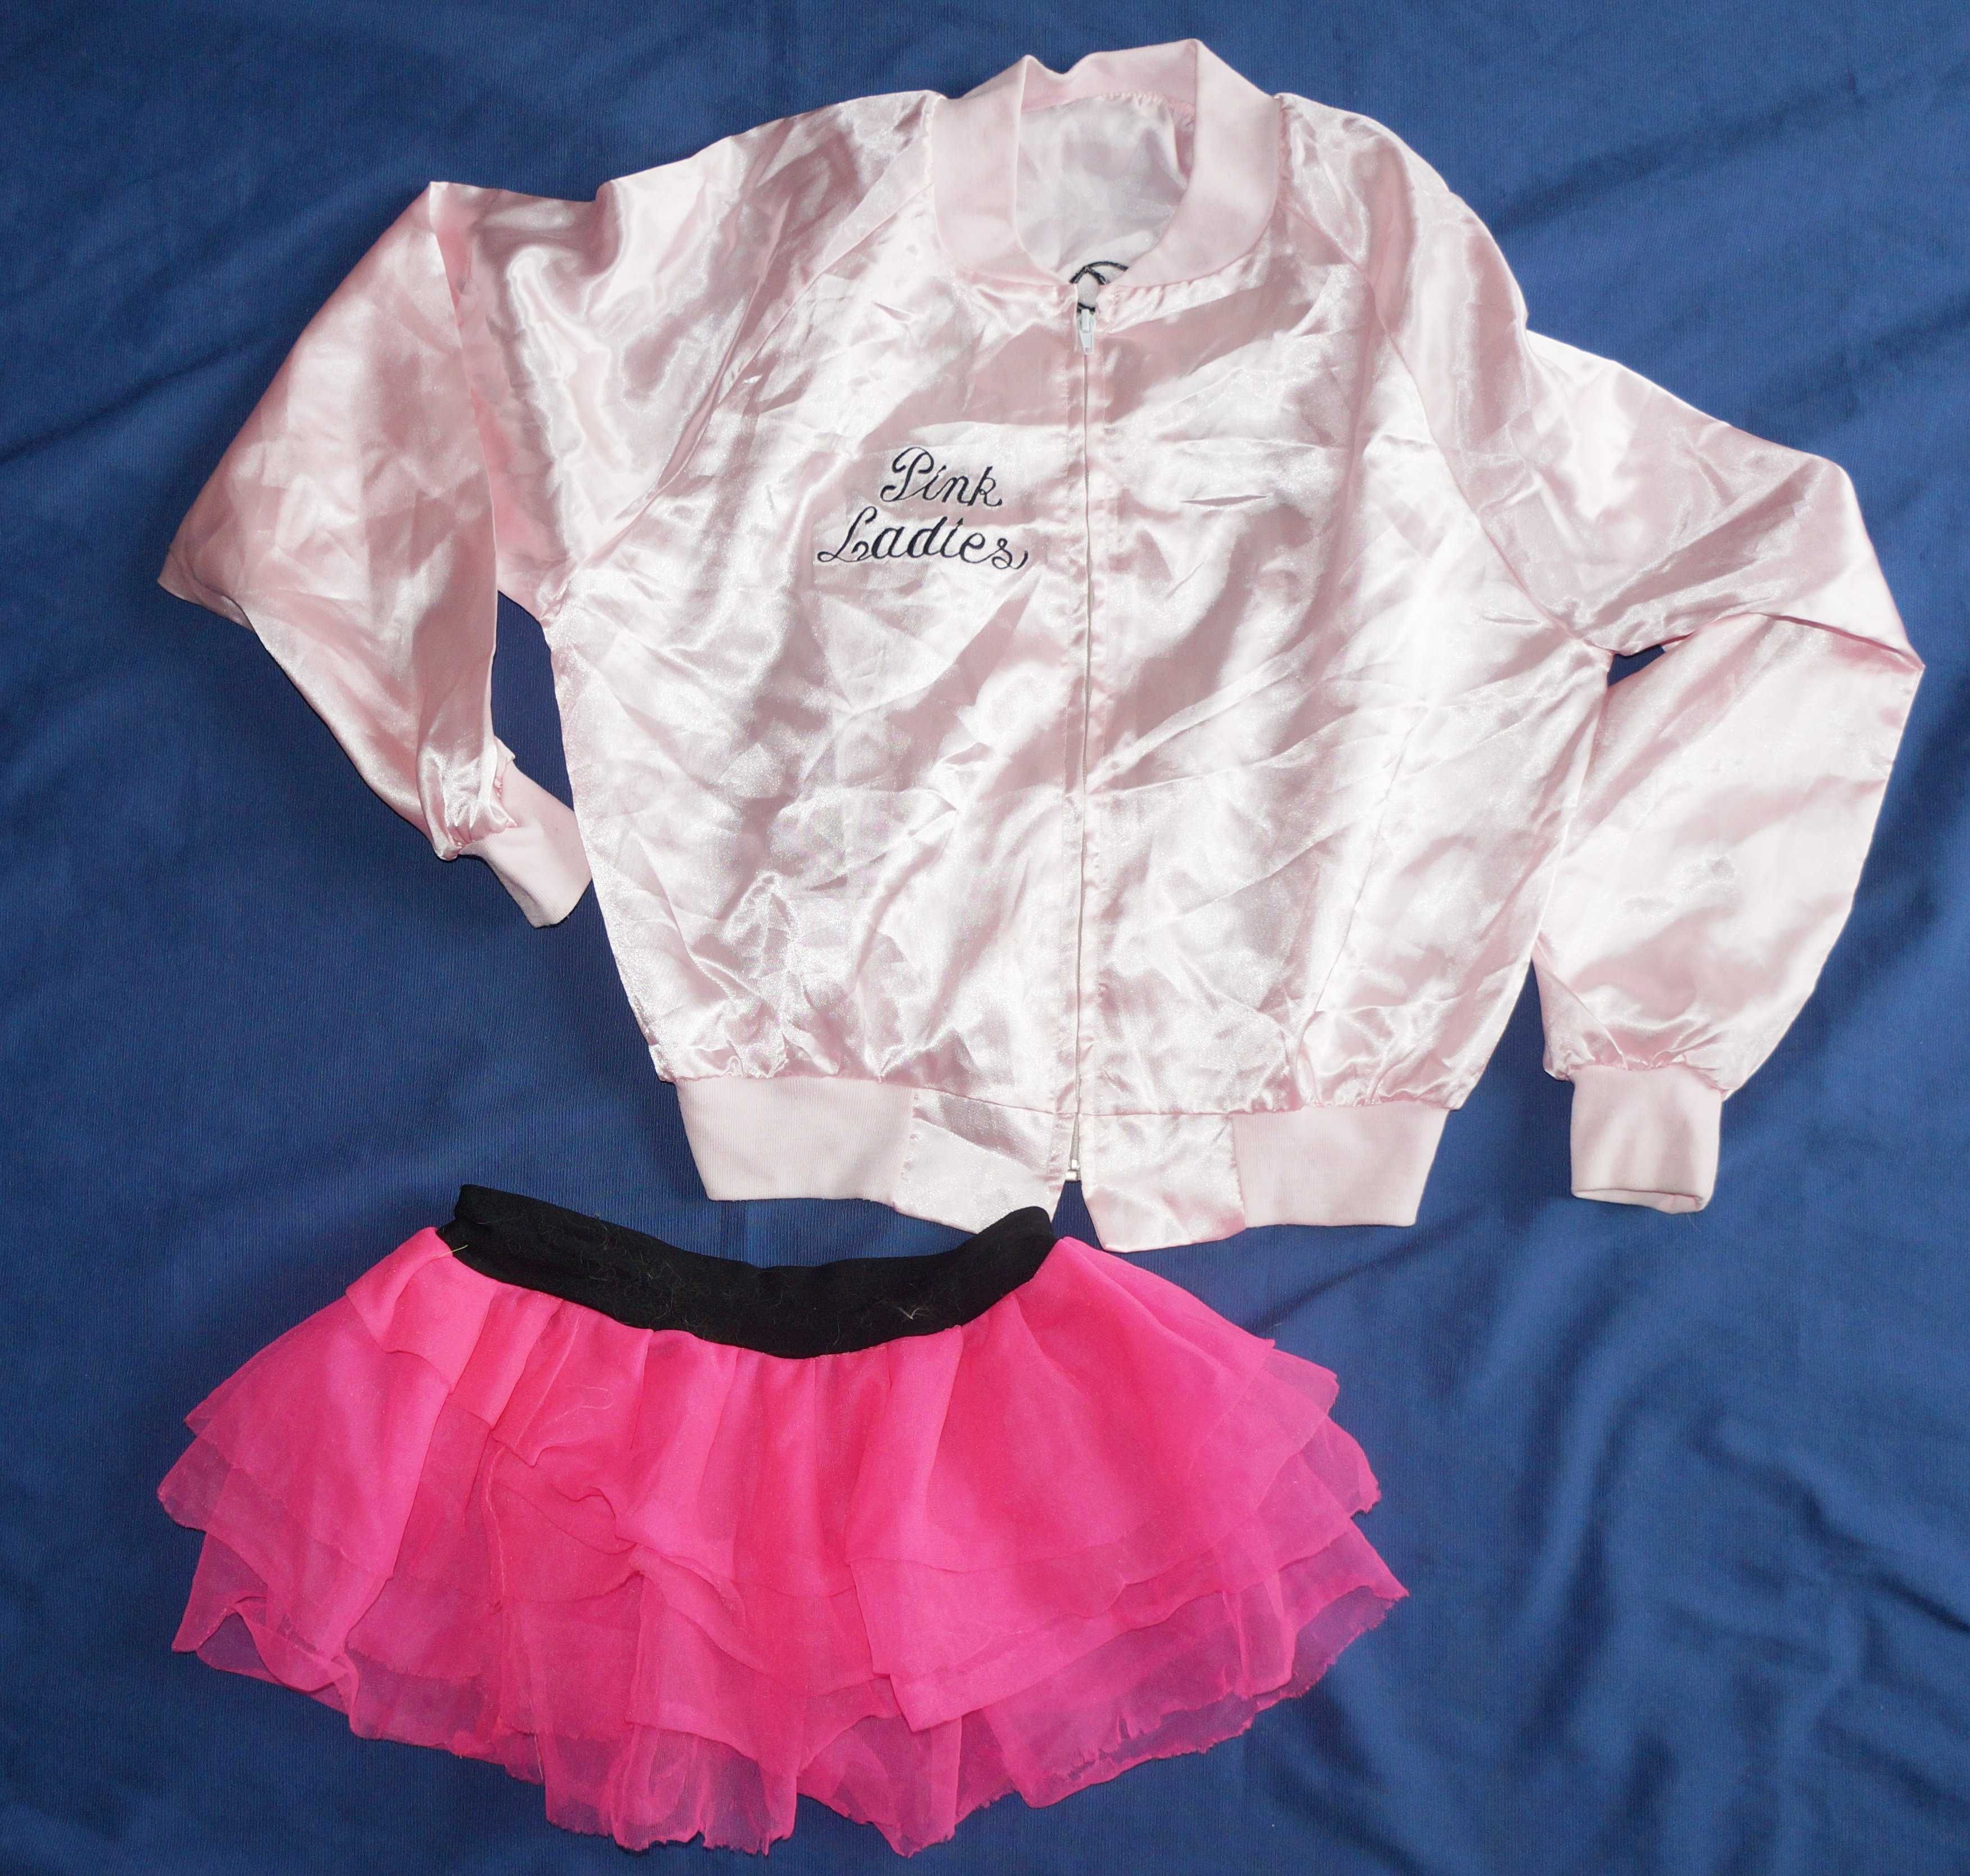 Kostium Pink Lady Grease Disco / Dres S / M